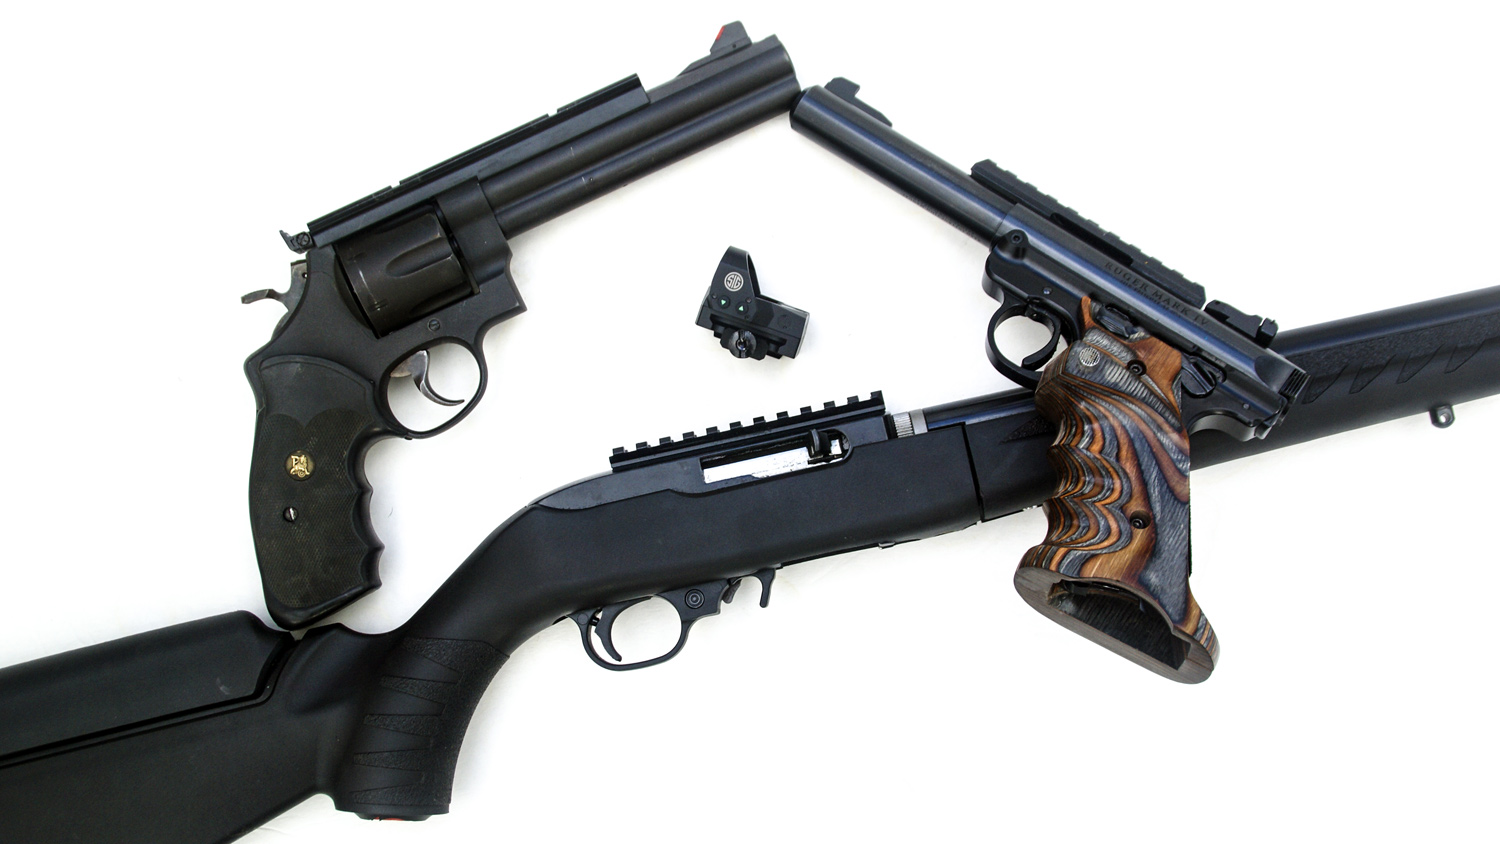 SIG Romeo1 6 MOA can be fitted on many guns with Picatinny rail